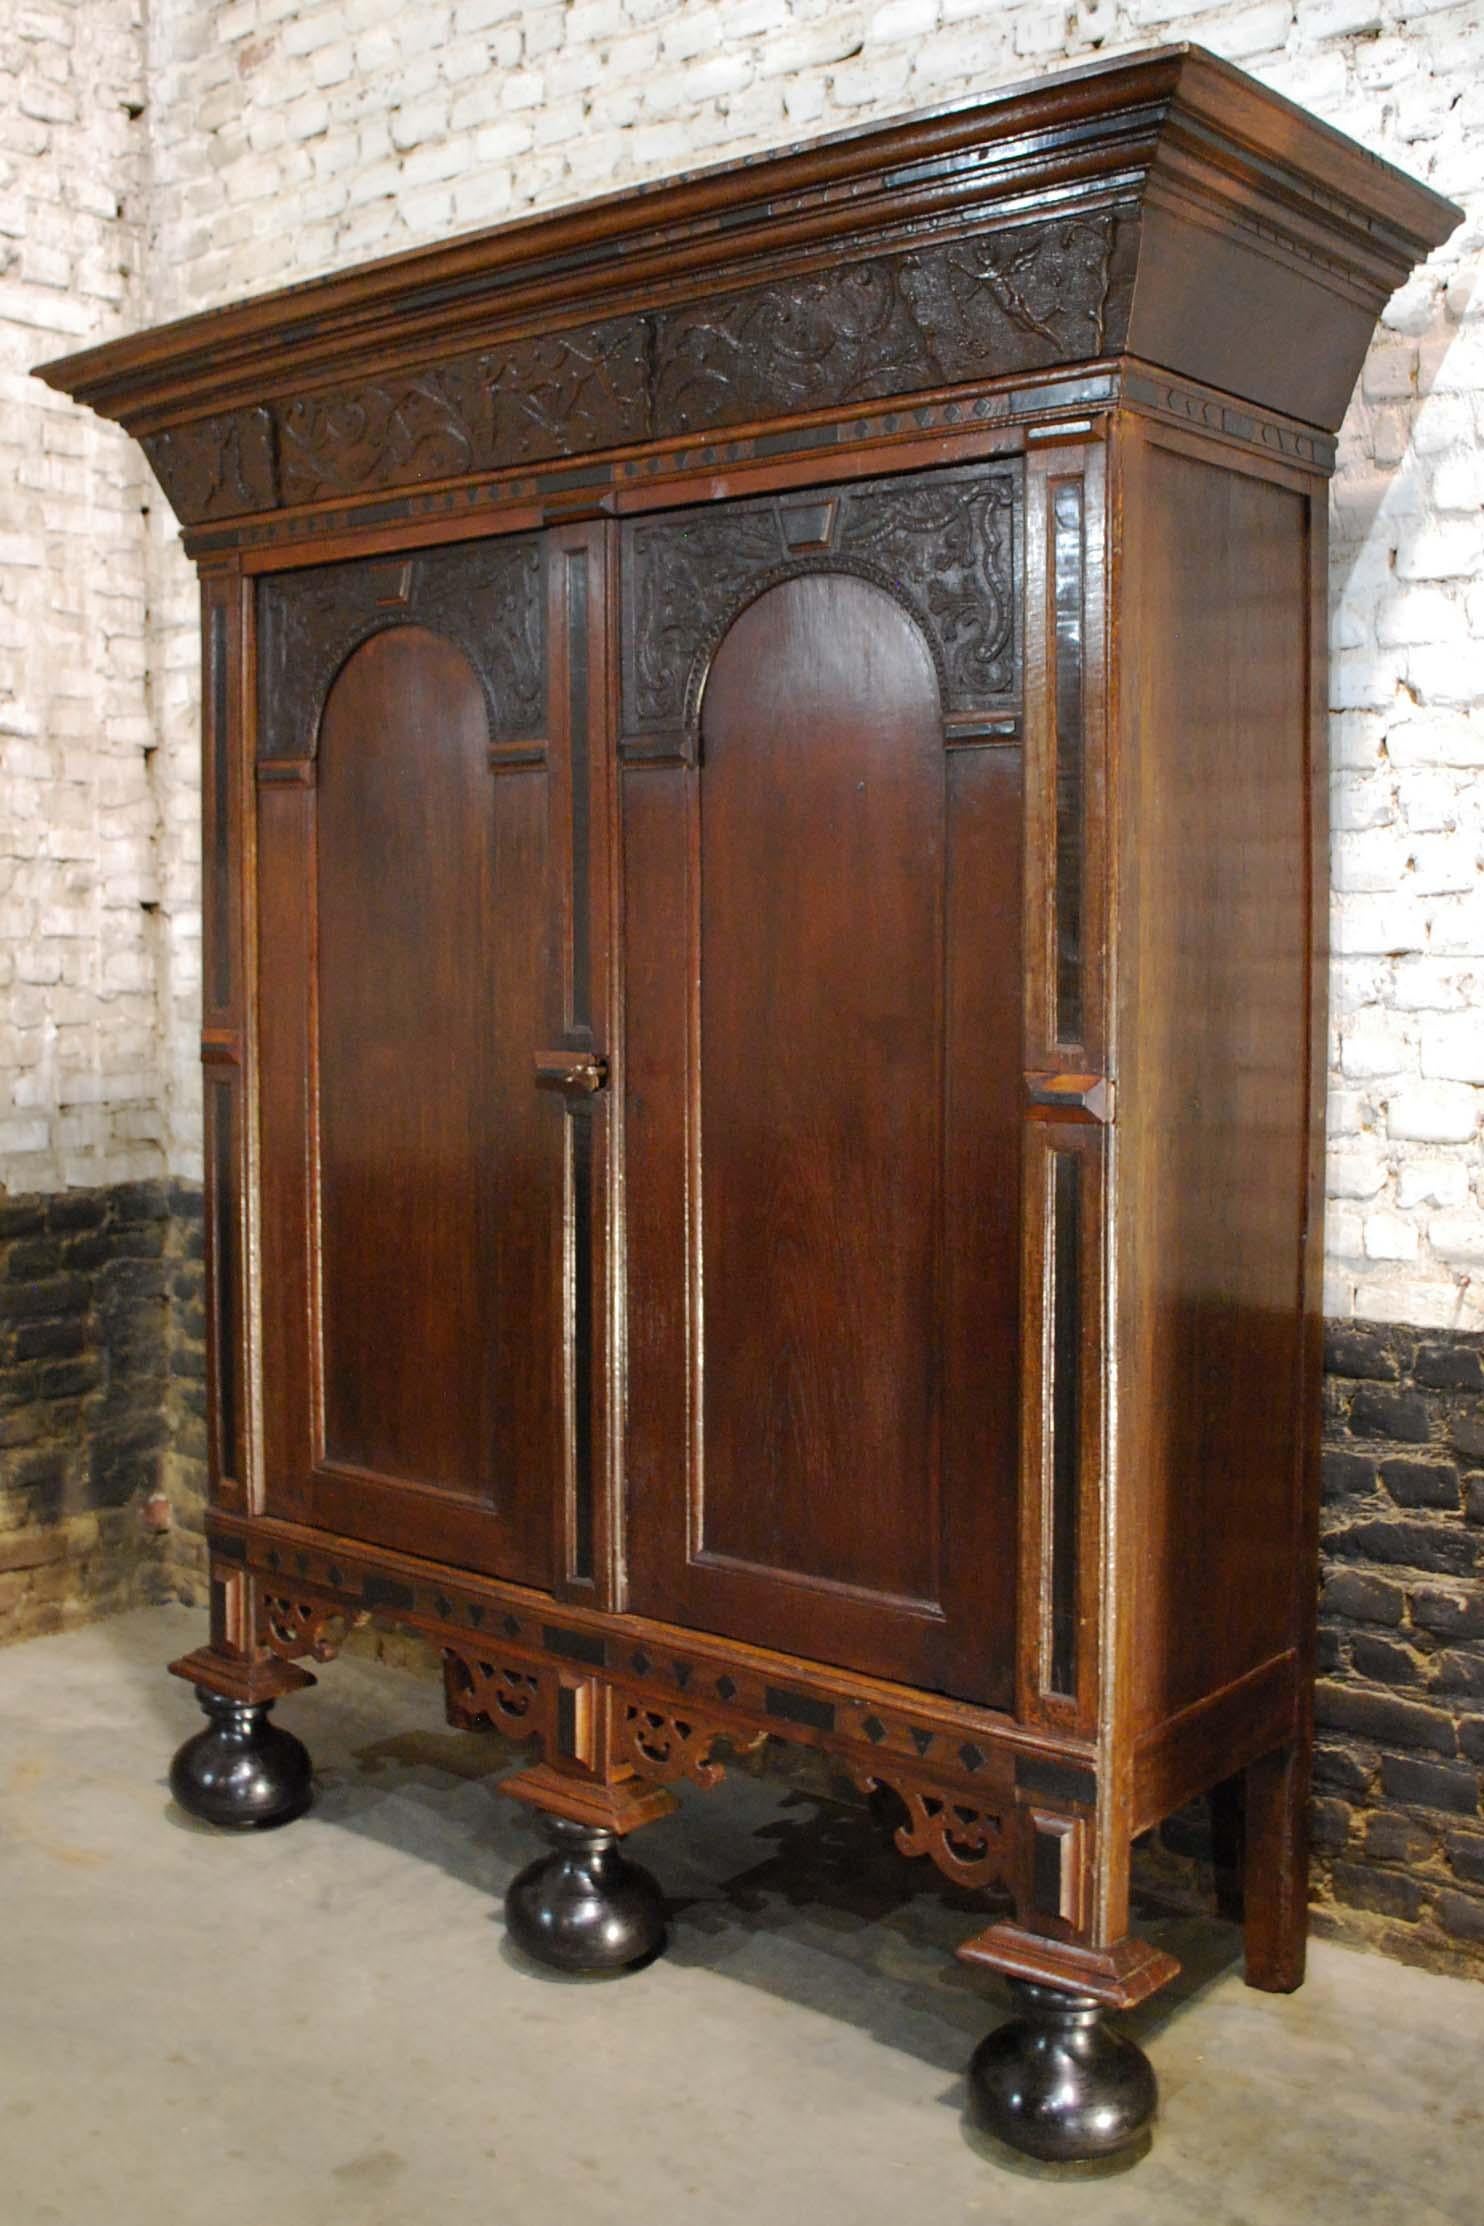 Beautiful and rare Dutch Renaissance two-door cabinet. This cabinet stems from an era in Dutch history that is called 